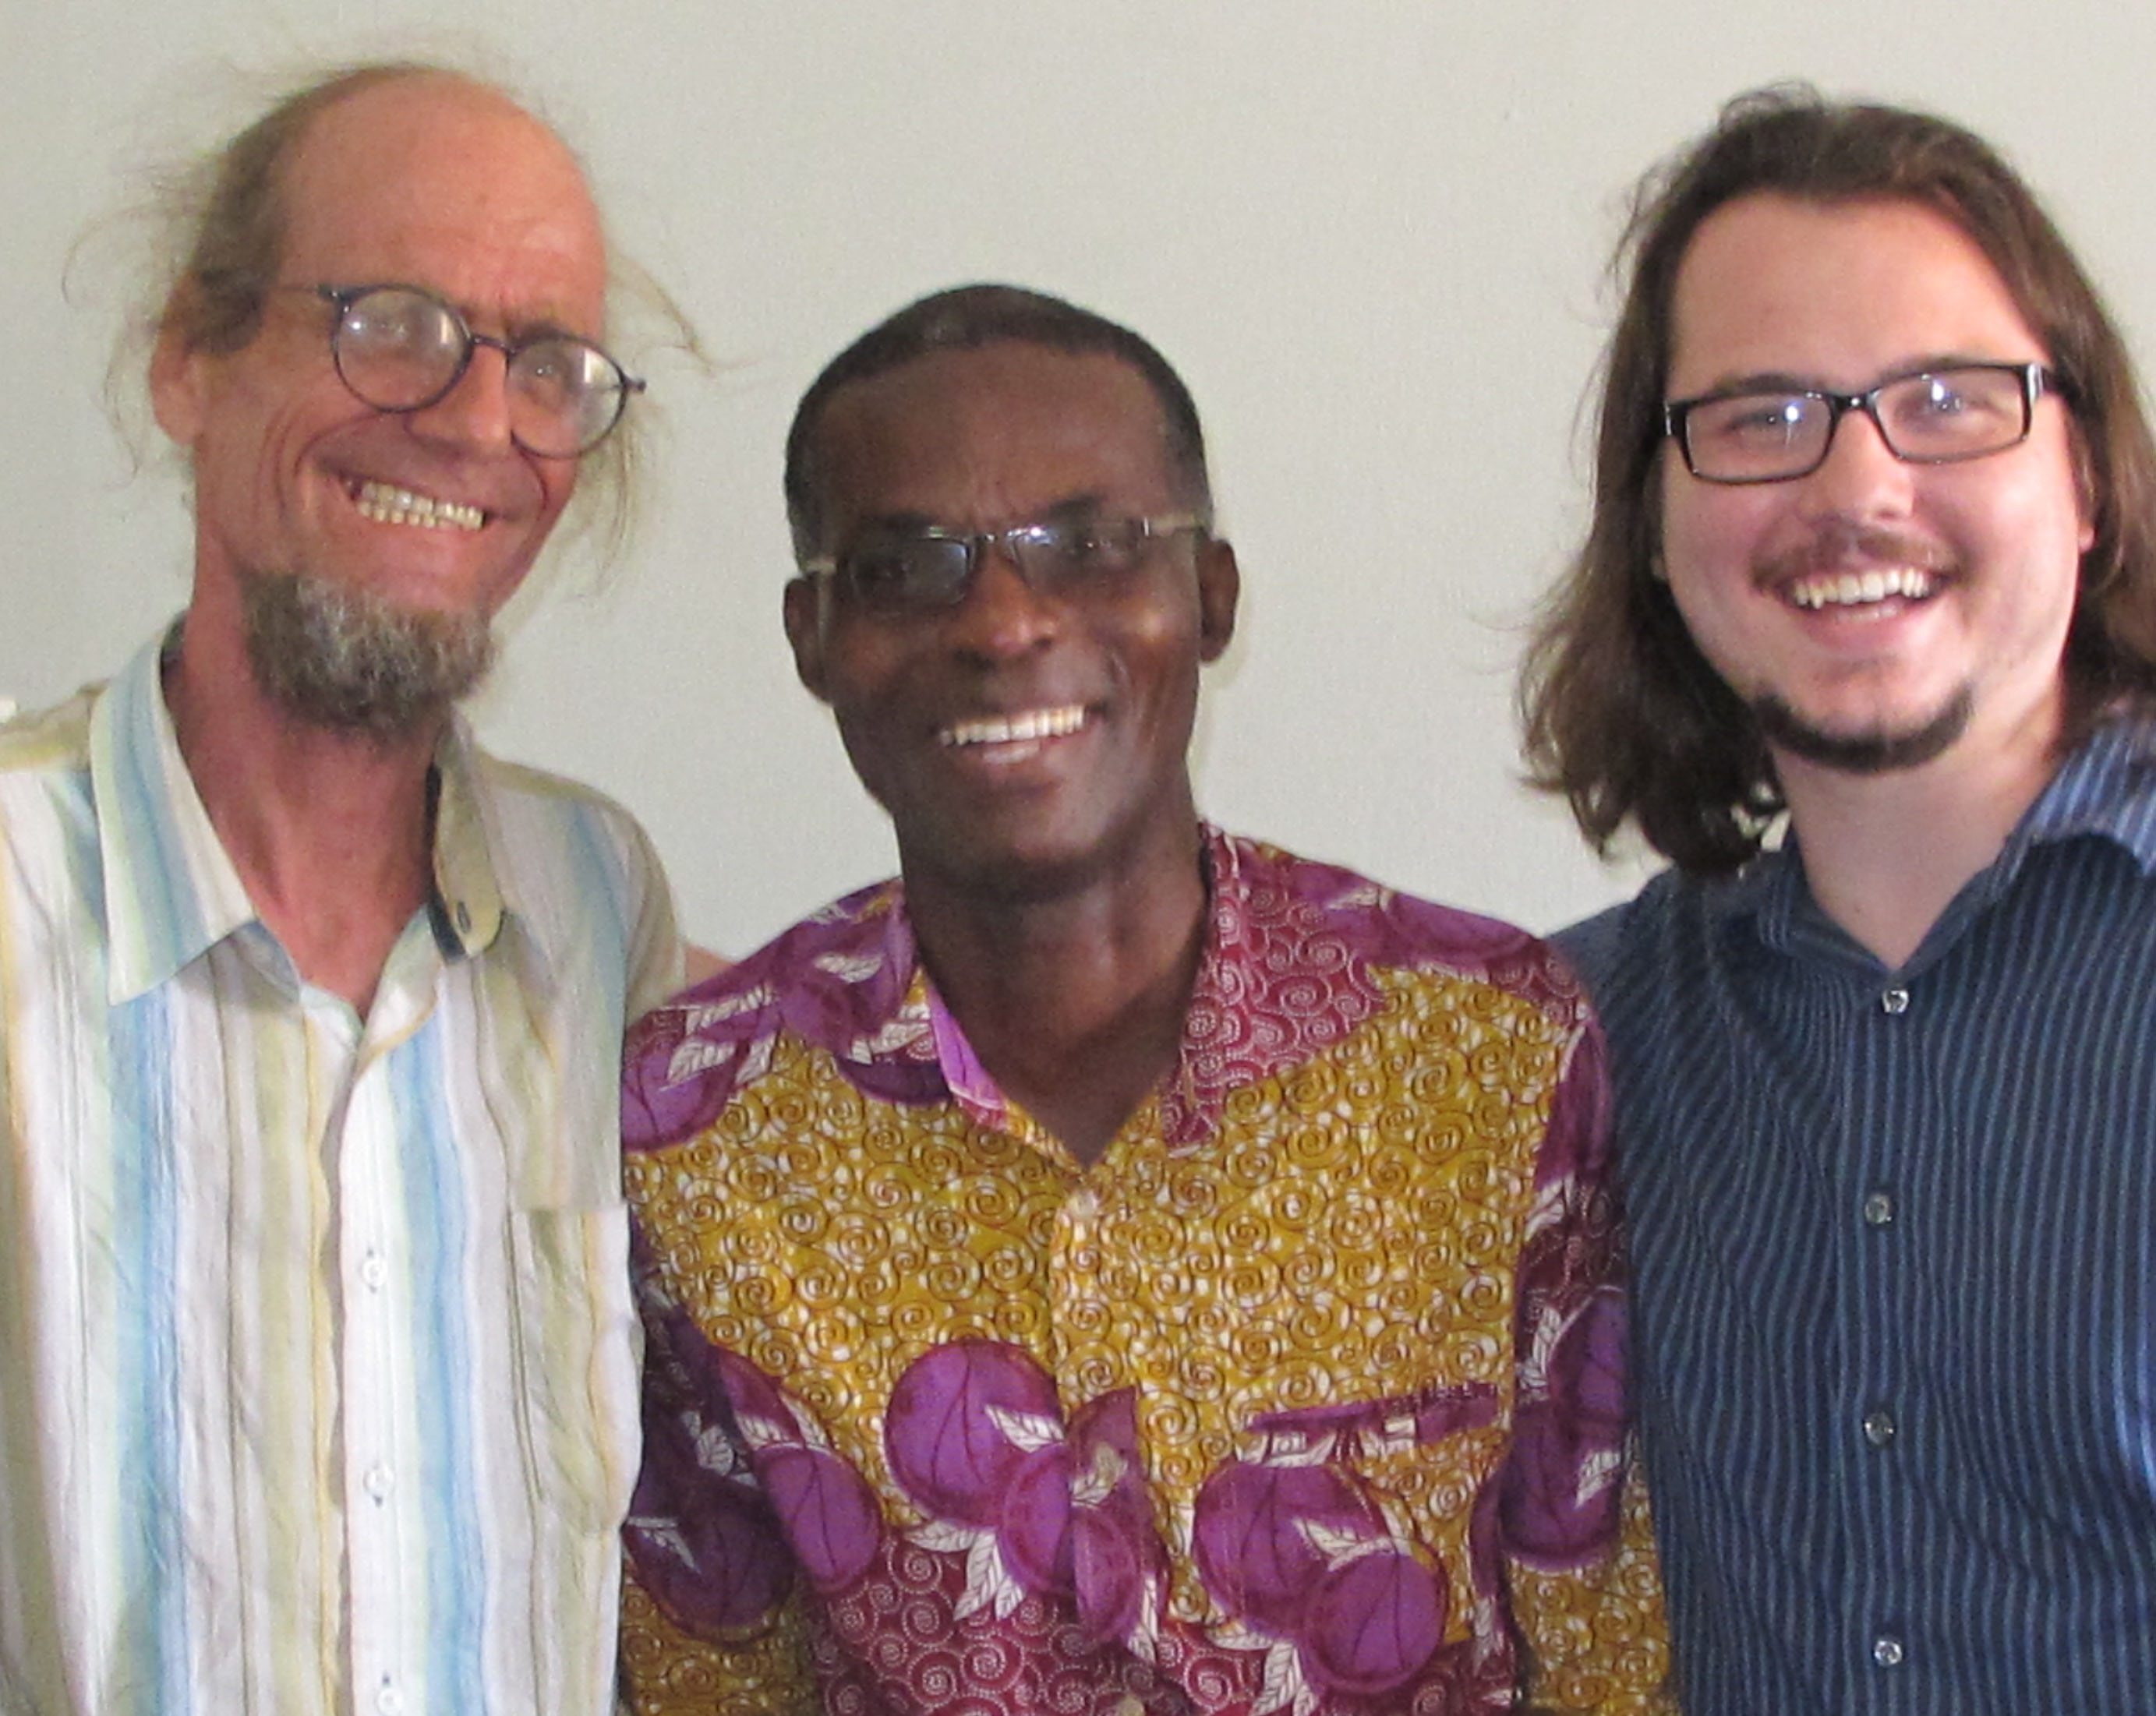 Jordan Taylor has planned a classical music festival in Ghana, where he lived from 1993-2006.